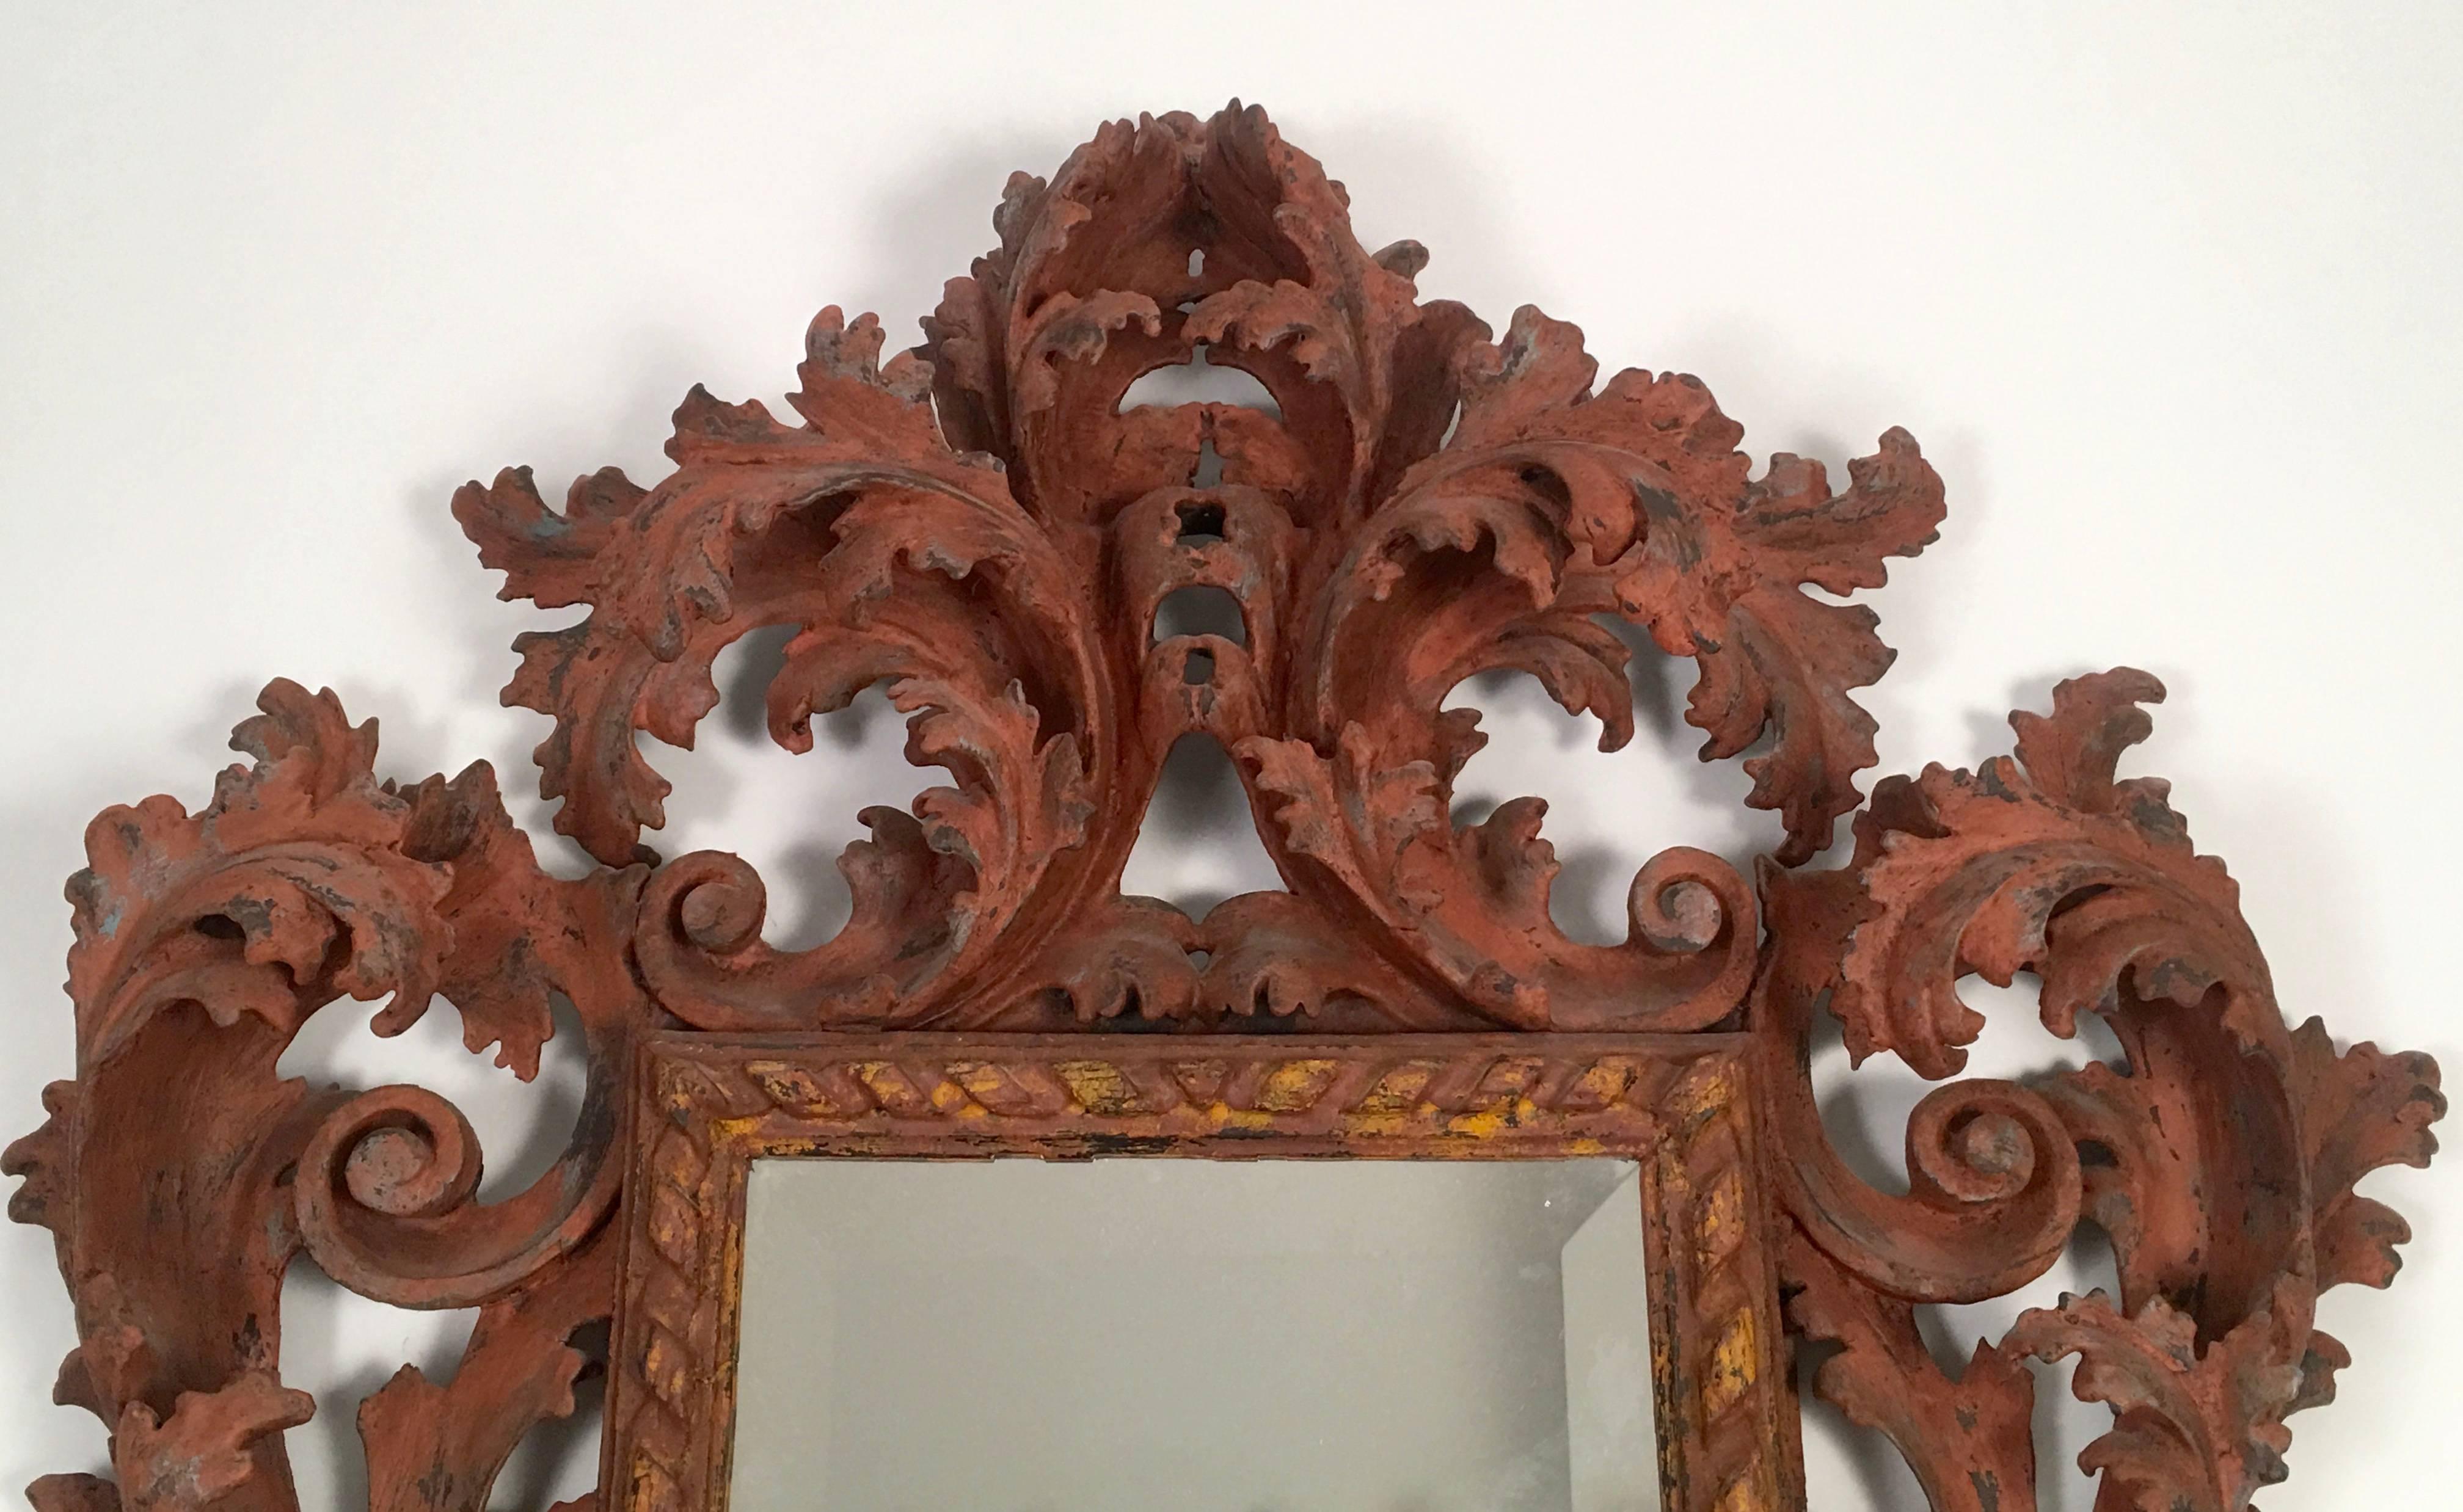 A dramatic and highly decorative Italian Baroque style carved and salmon painted  wood mirror, with boldly carved acanthus leaves and architectural scrolls surrounding a rectangular beveled mirror with highlighted rope twist surround.  